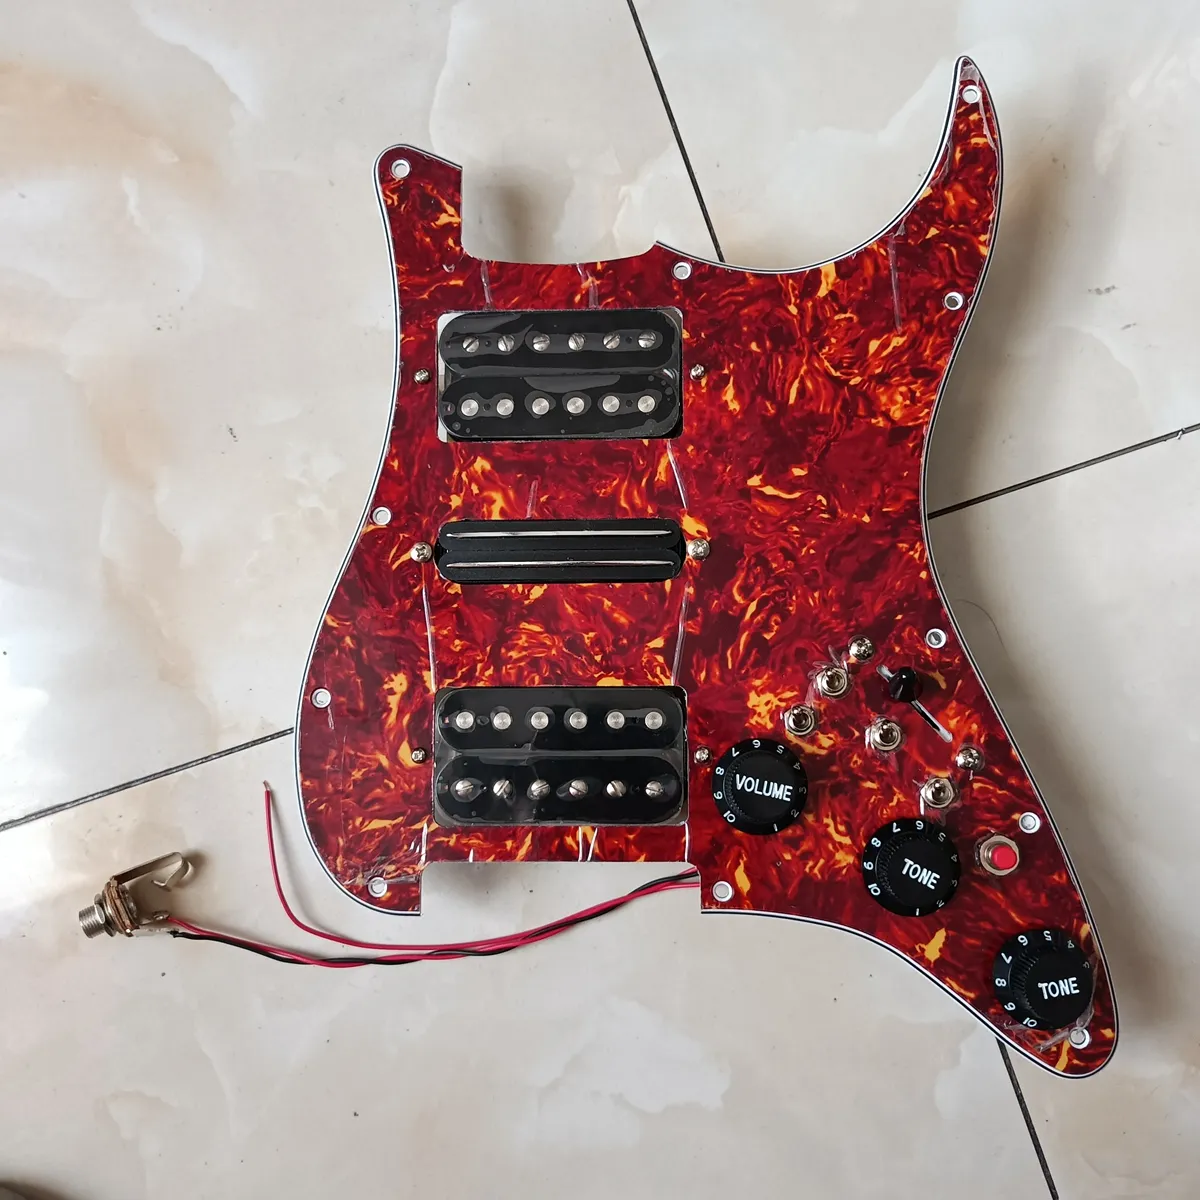 HSH Upgrade Prewired Pickguard Set Multifunction Switch Black Humbucker Alnico Pickups 4 Single Cut Switch 20 Tones More for FD Guitar